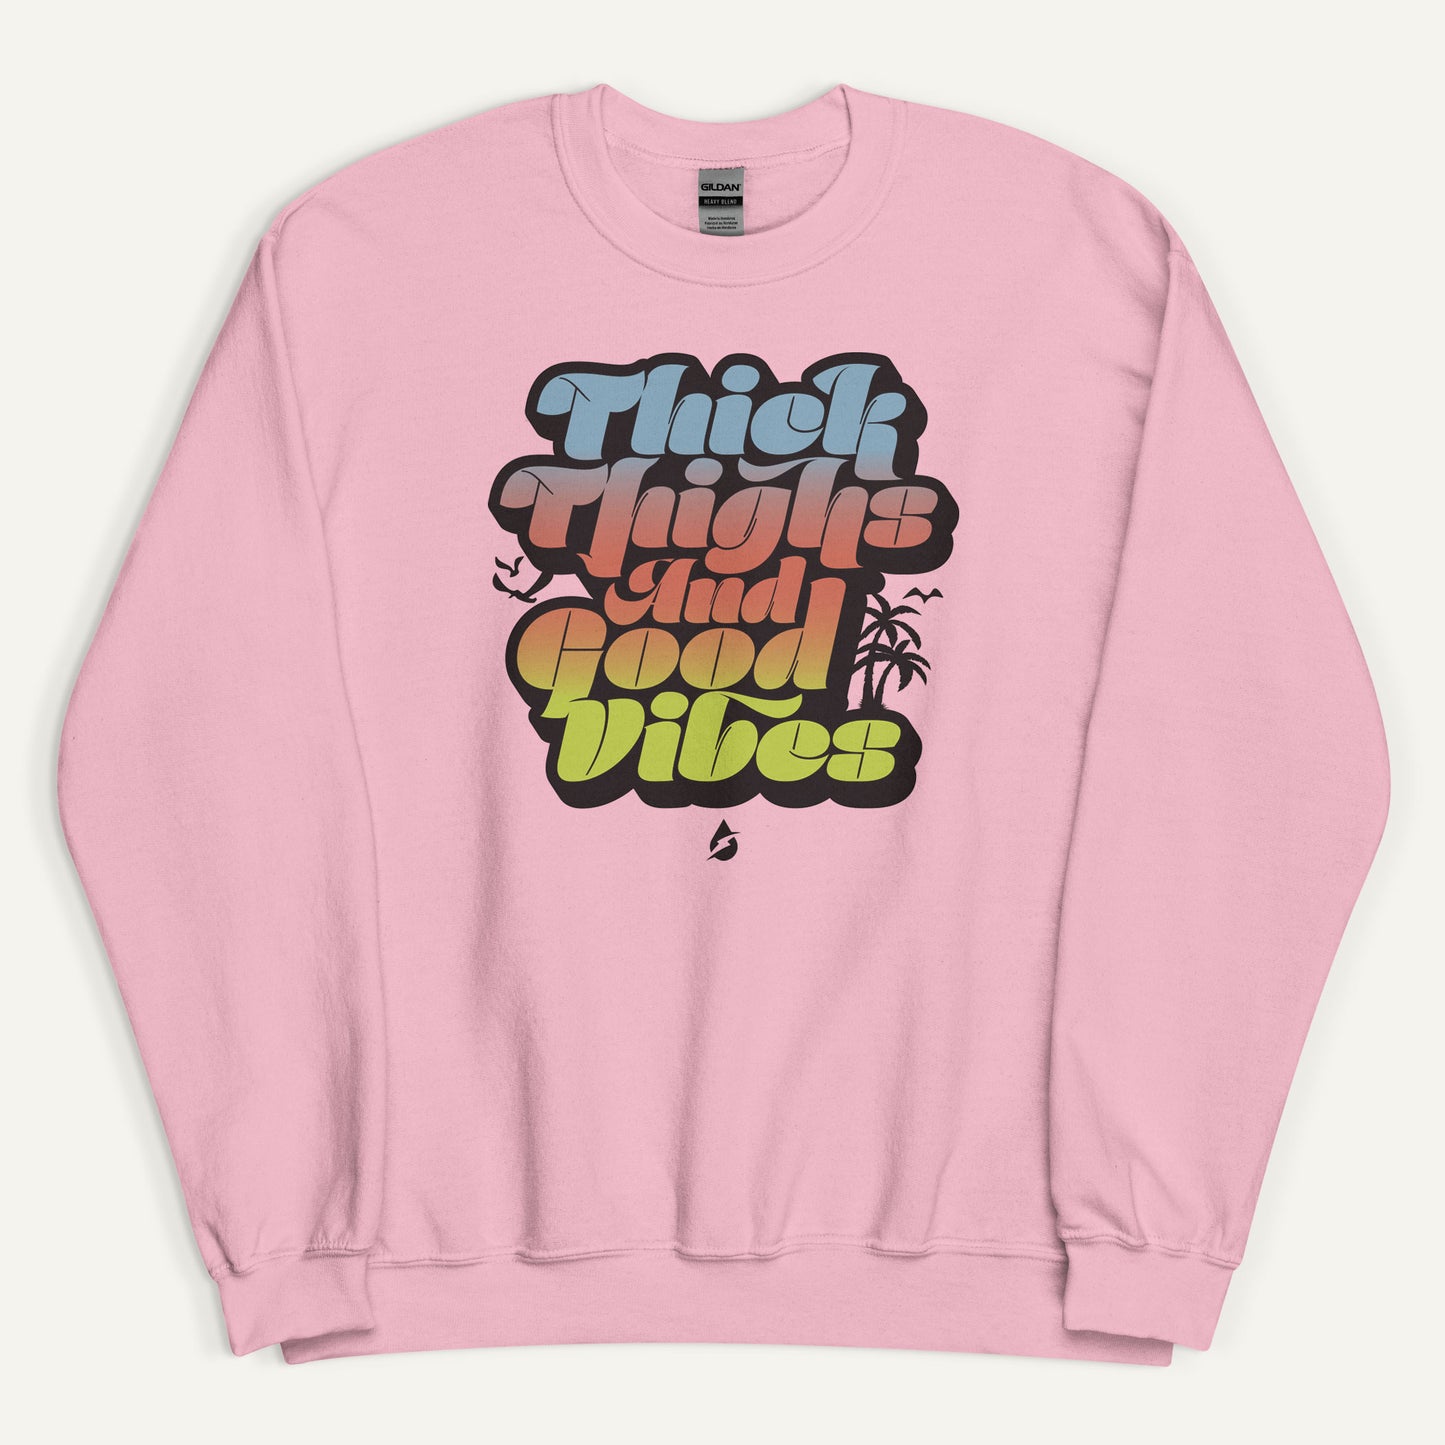 Thick Thighs And Good Vibes Sweatshirt